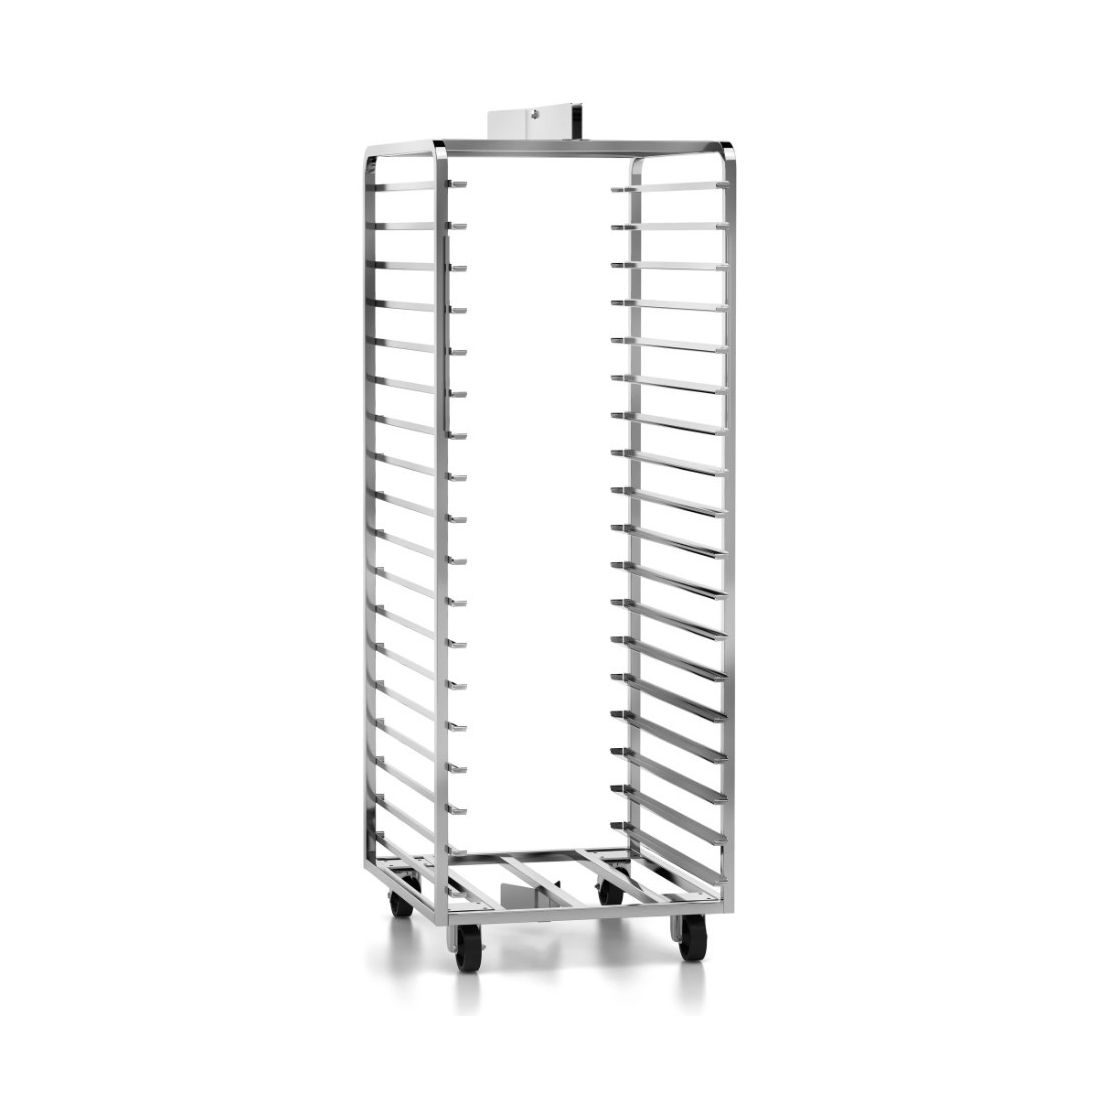 REAL FORNI Stainless steel rotary trolley 18 shelves